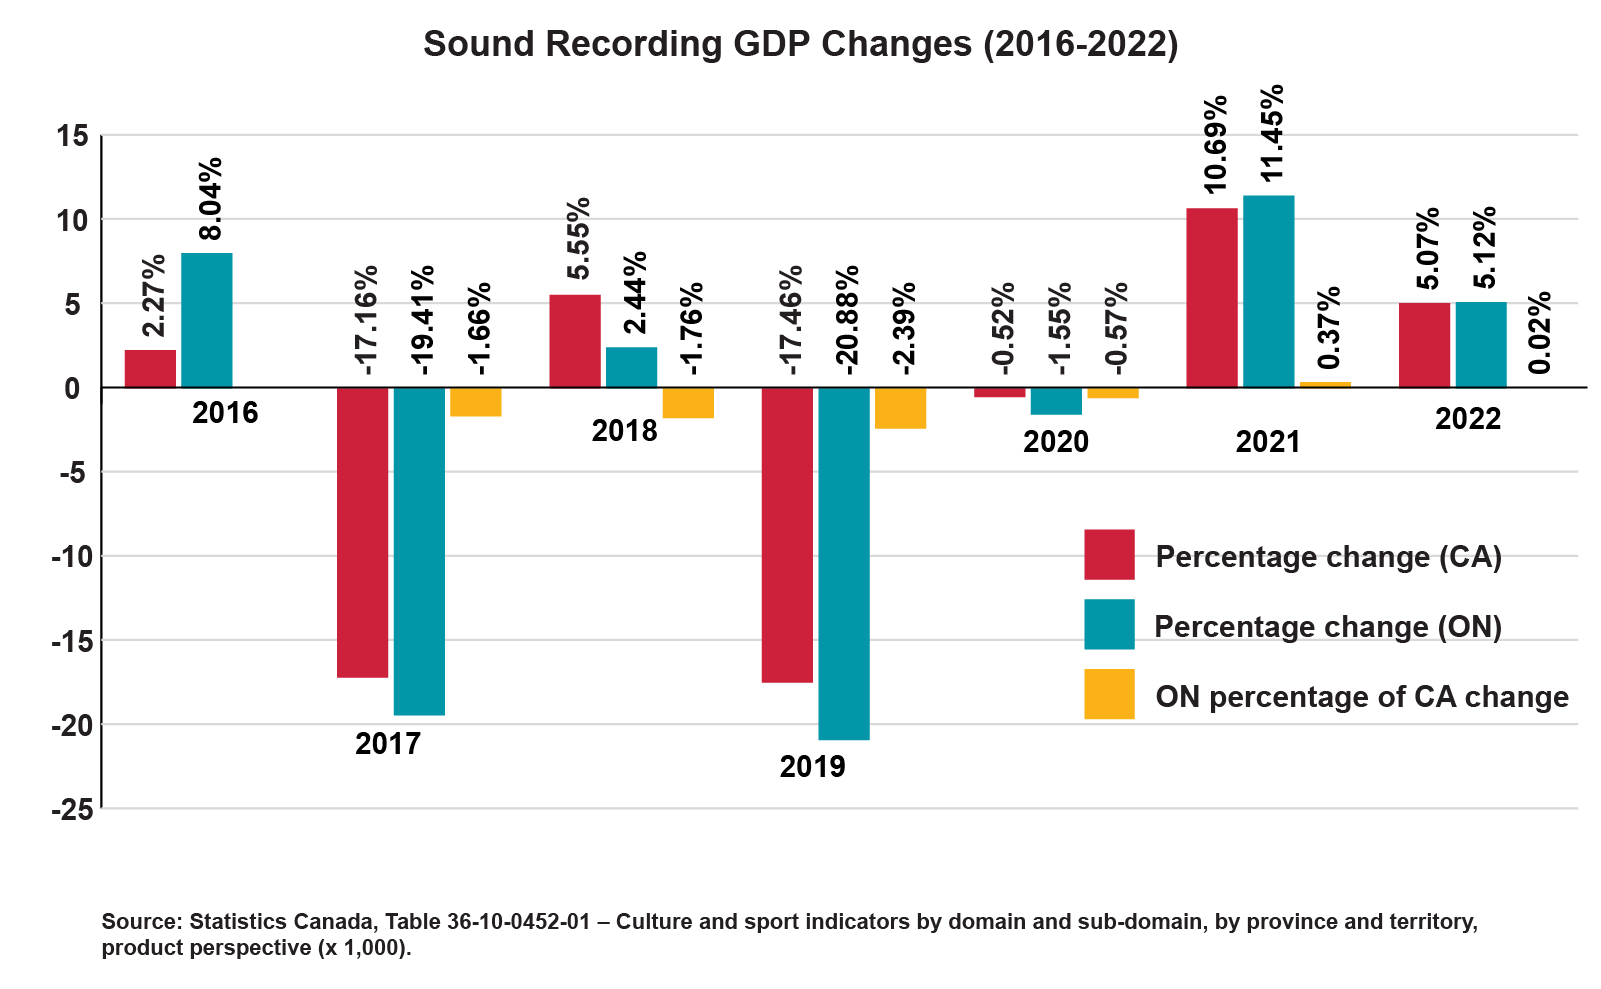 A bar chart depicting the GDP increases for Canada and Ontario, as well as the change in what percentage of national GDP Ontario contributed